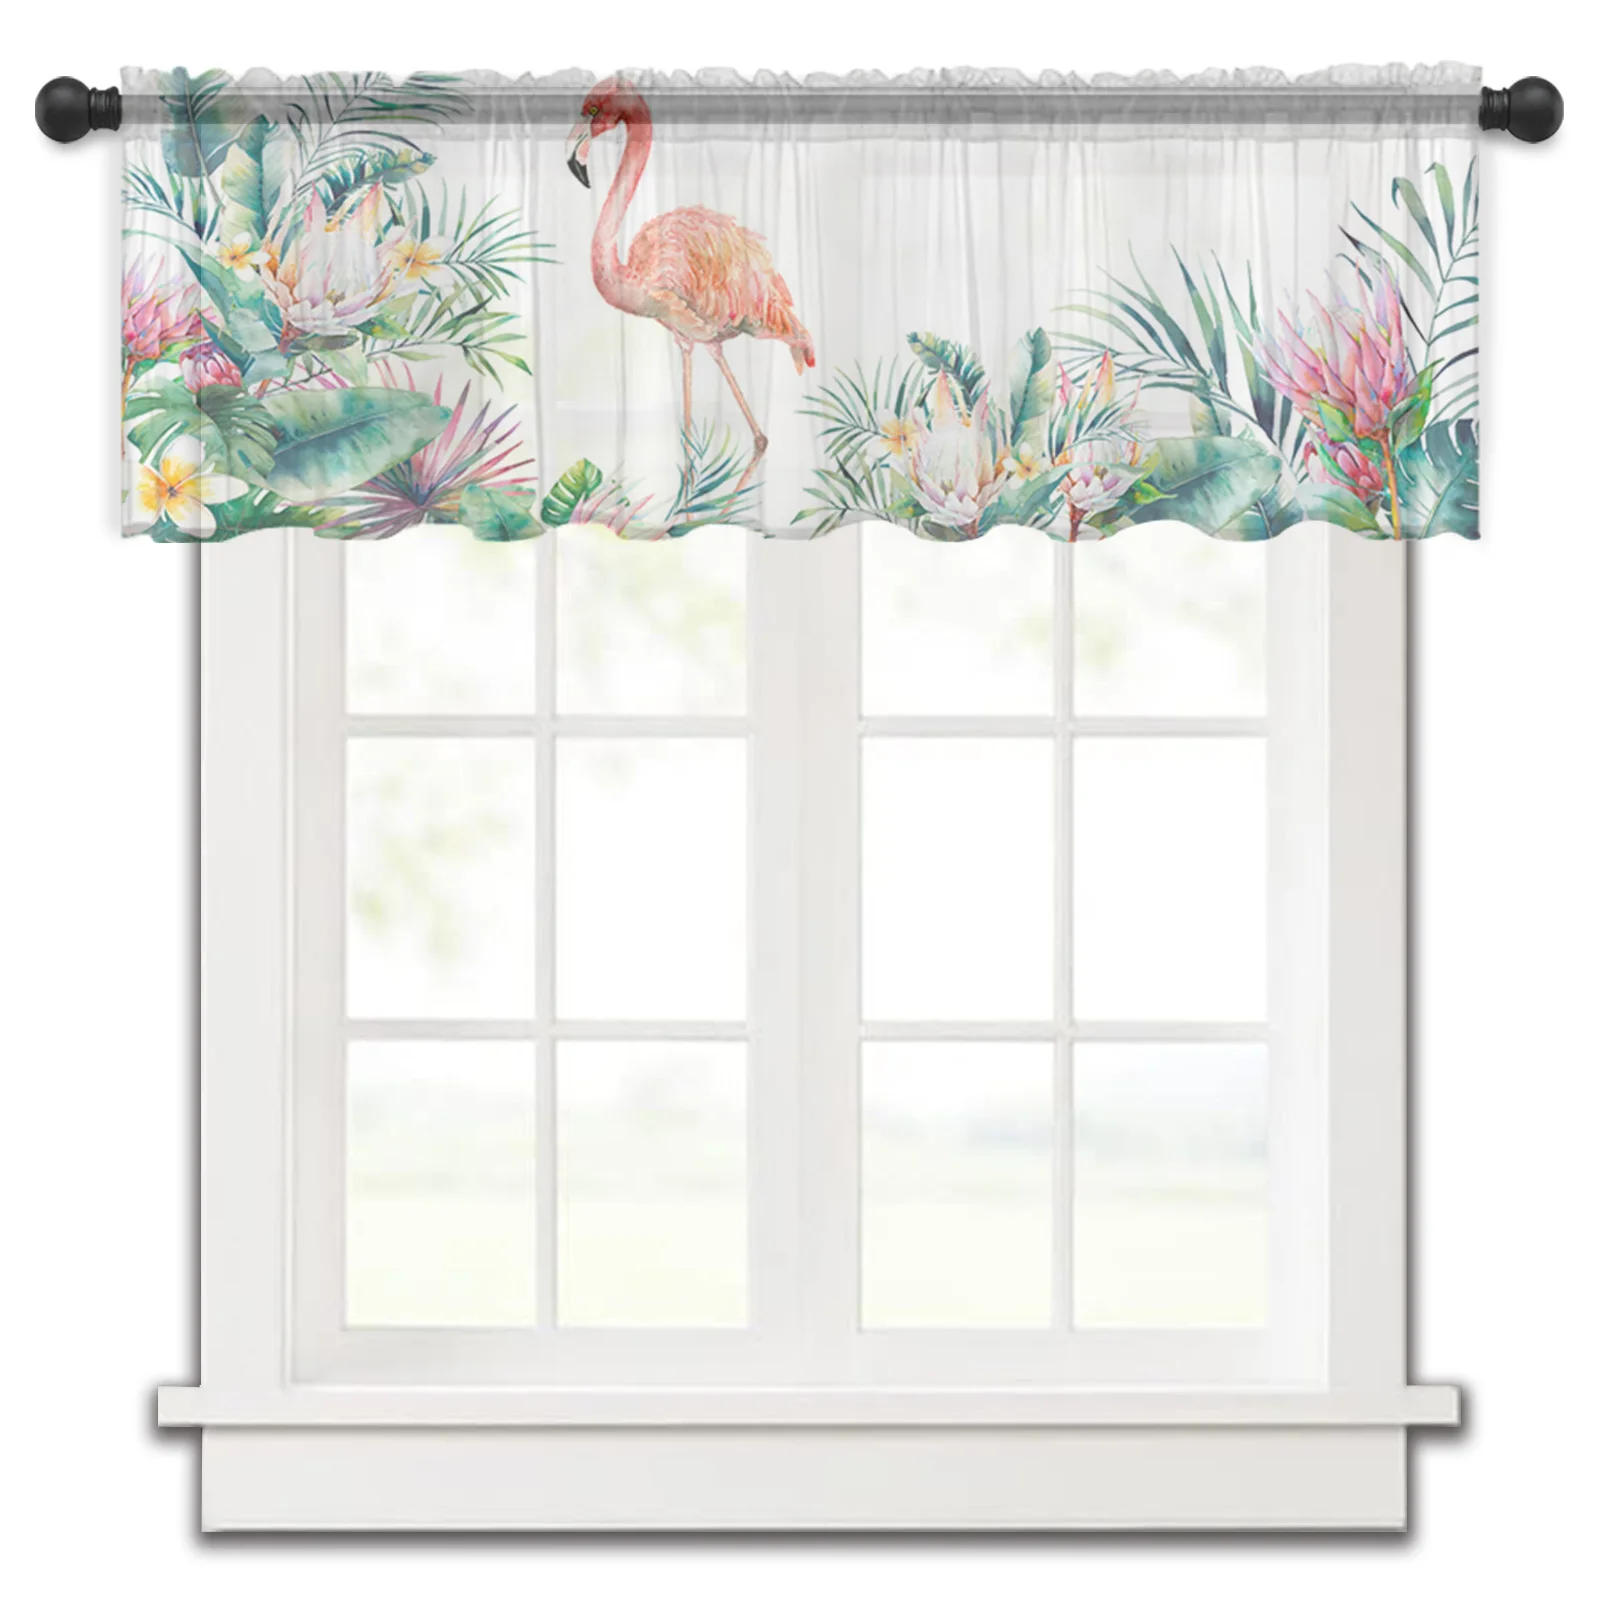 

Flamingo Turtle Leaf Tropical Kitchen Small Window Curtain Tulle Sheer Short Curtain Bedroom Living Room Home Decor Voile Drapes